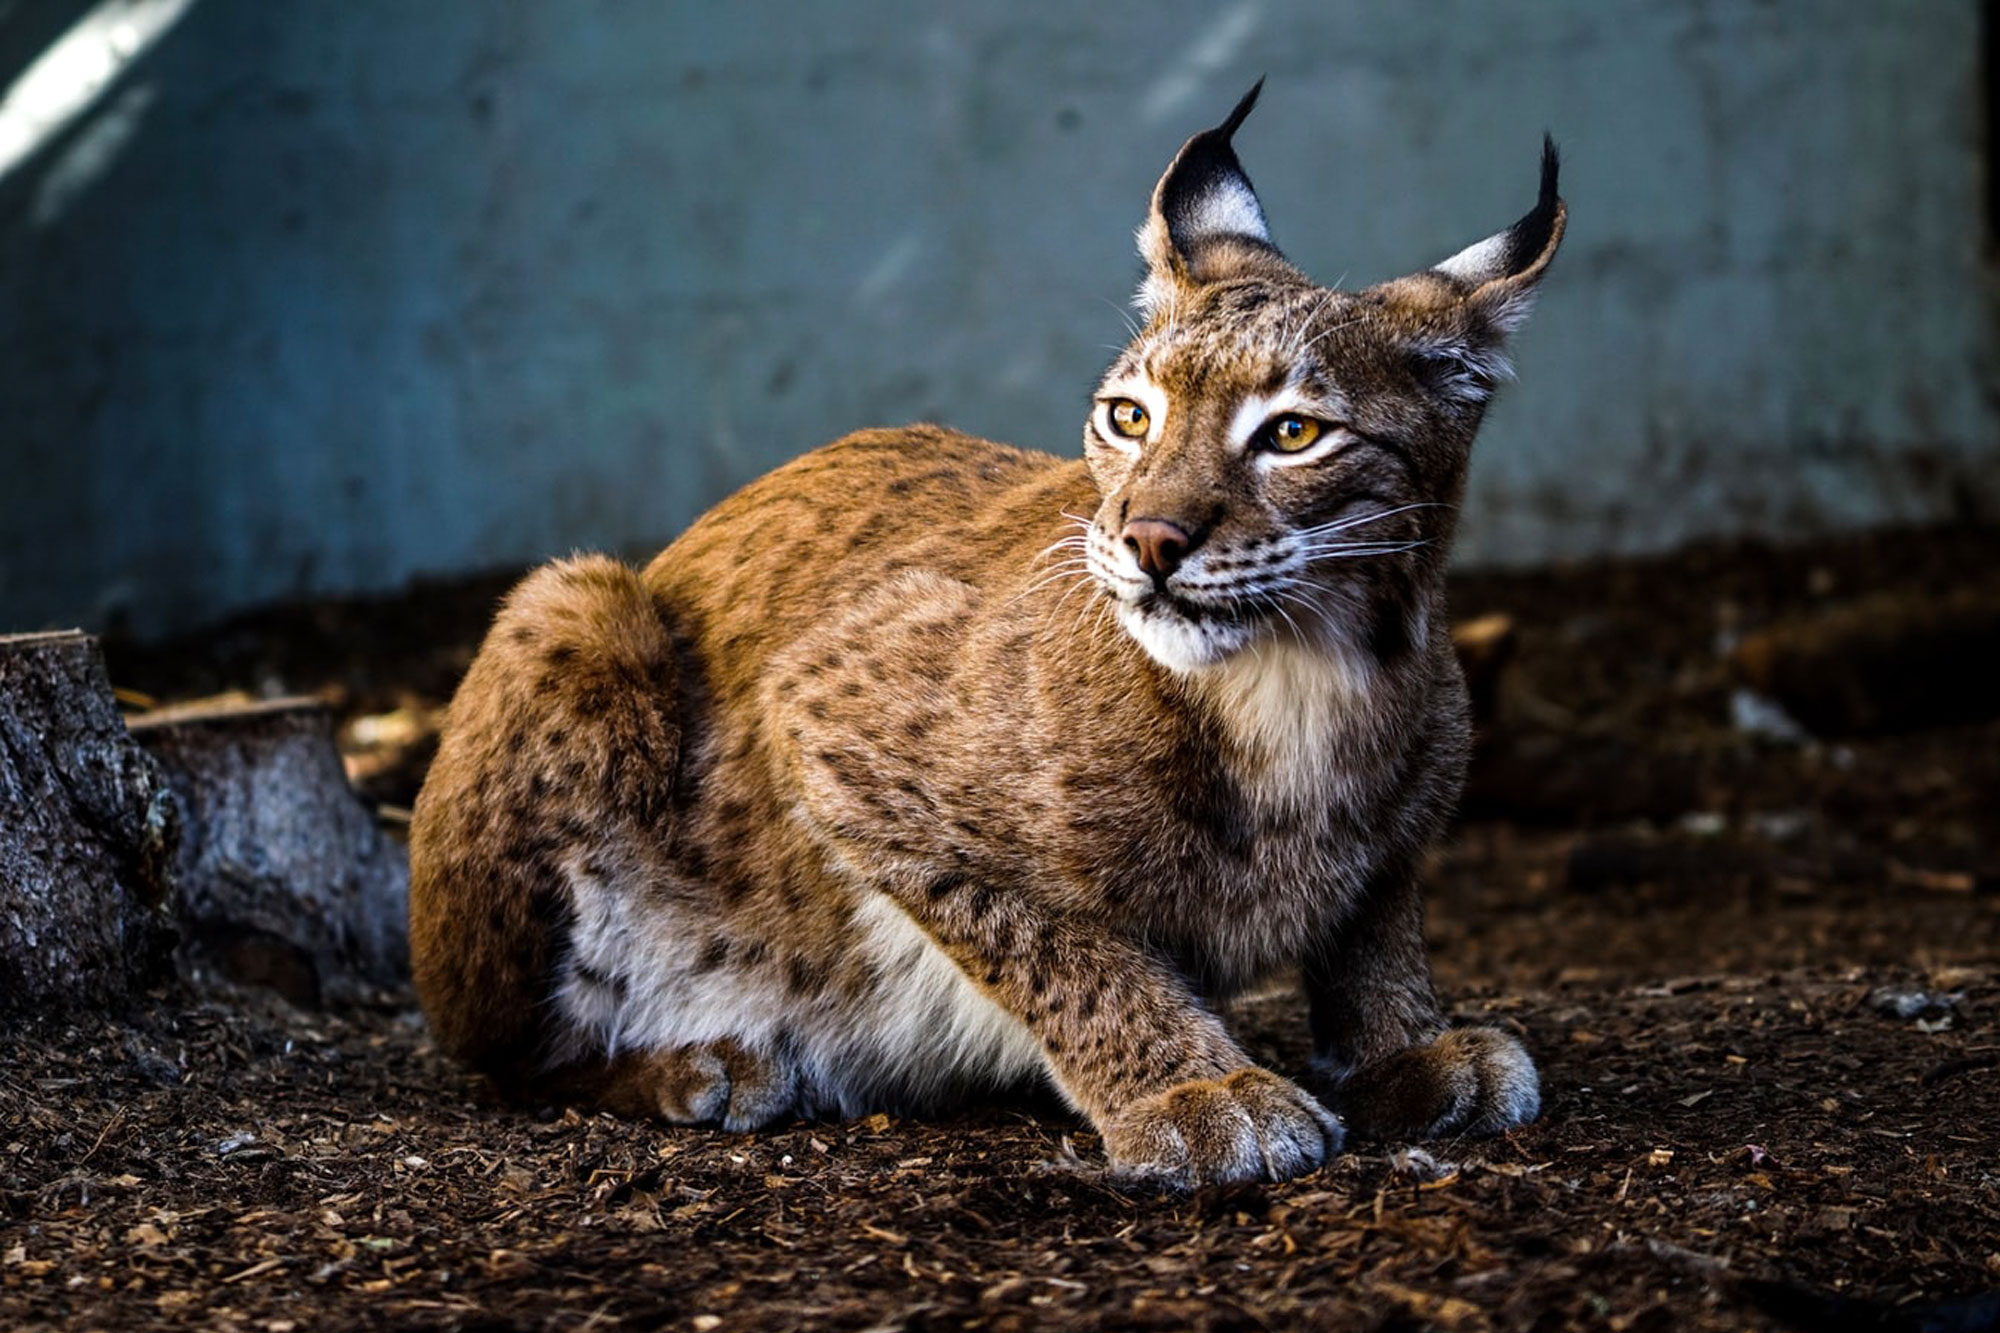 The Lynx UK Trust is working t return the Eurasian Lynx to the UK, where it was hunted to extinction ca. 7000AD